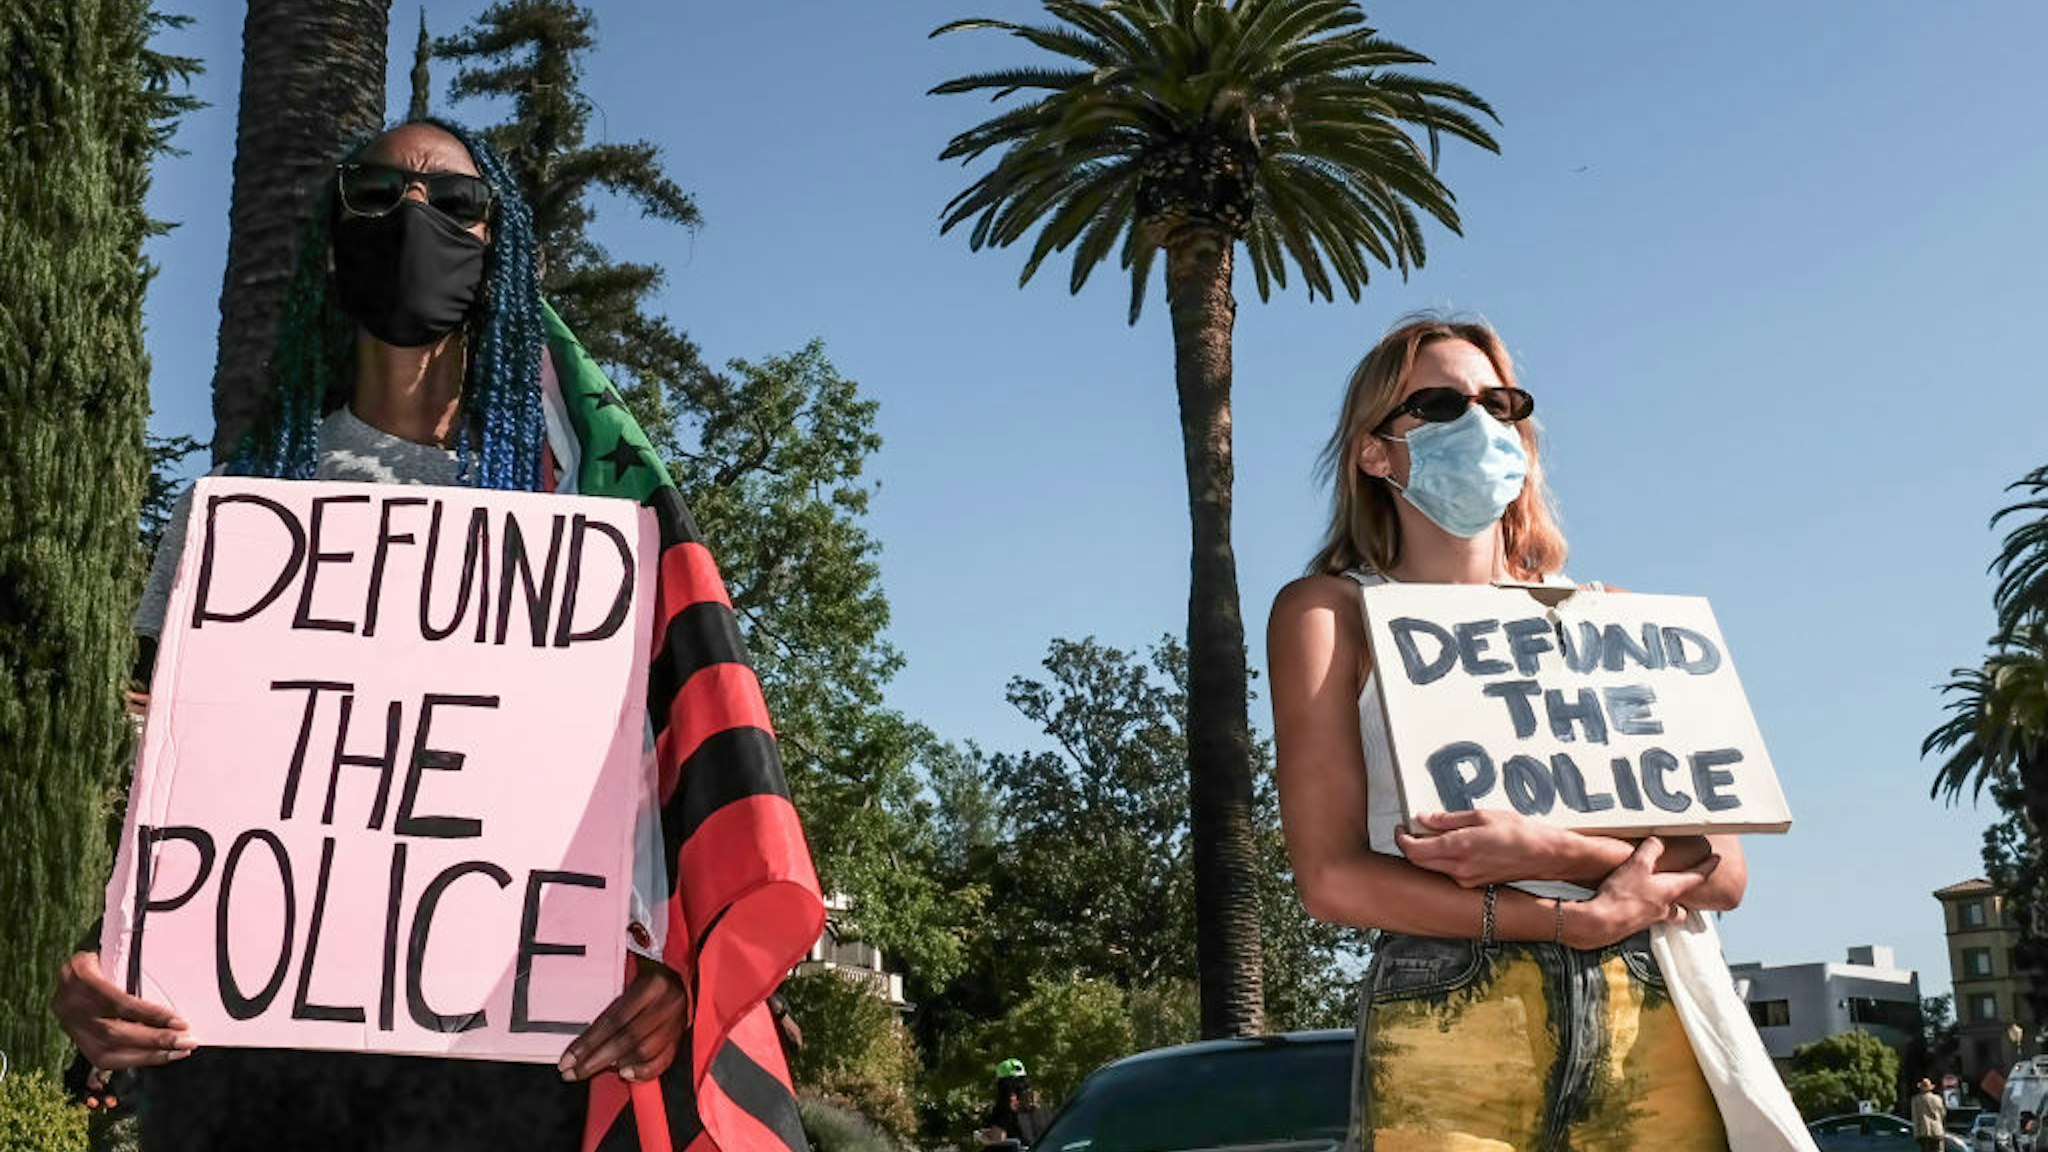 LOS ANGELES, CALIFORNIA, UNITED STATES - 2021/04/20: Protesters hold placards during the demonstration. Hours after the verdict of the Derek Chauvin trial, protesters meet outside of Los Angeles Mayor Eric Garcetti's home to protest his proposed funding of the Los Angeles Police Department.